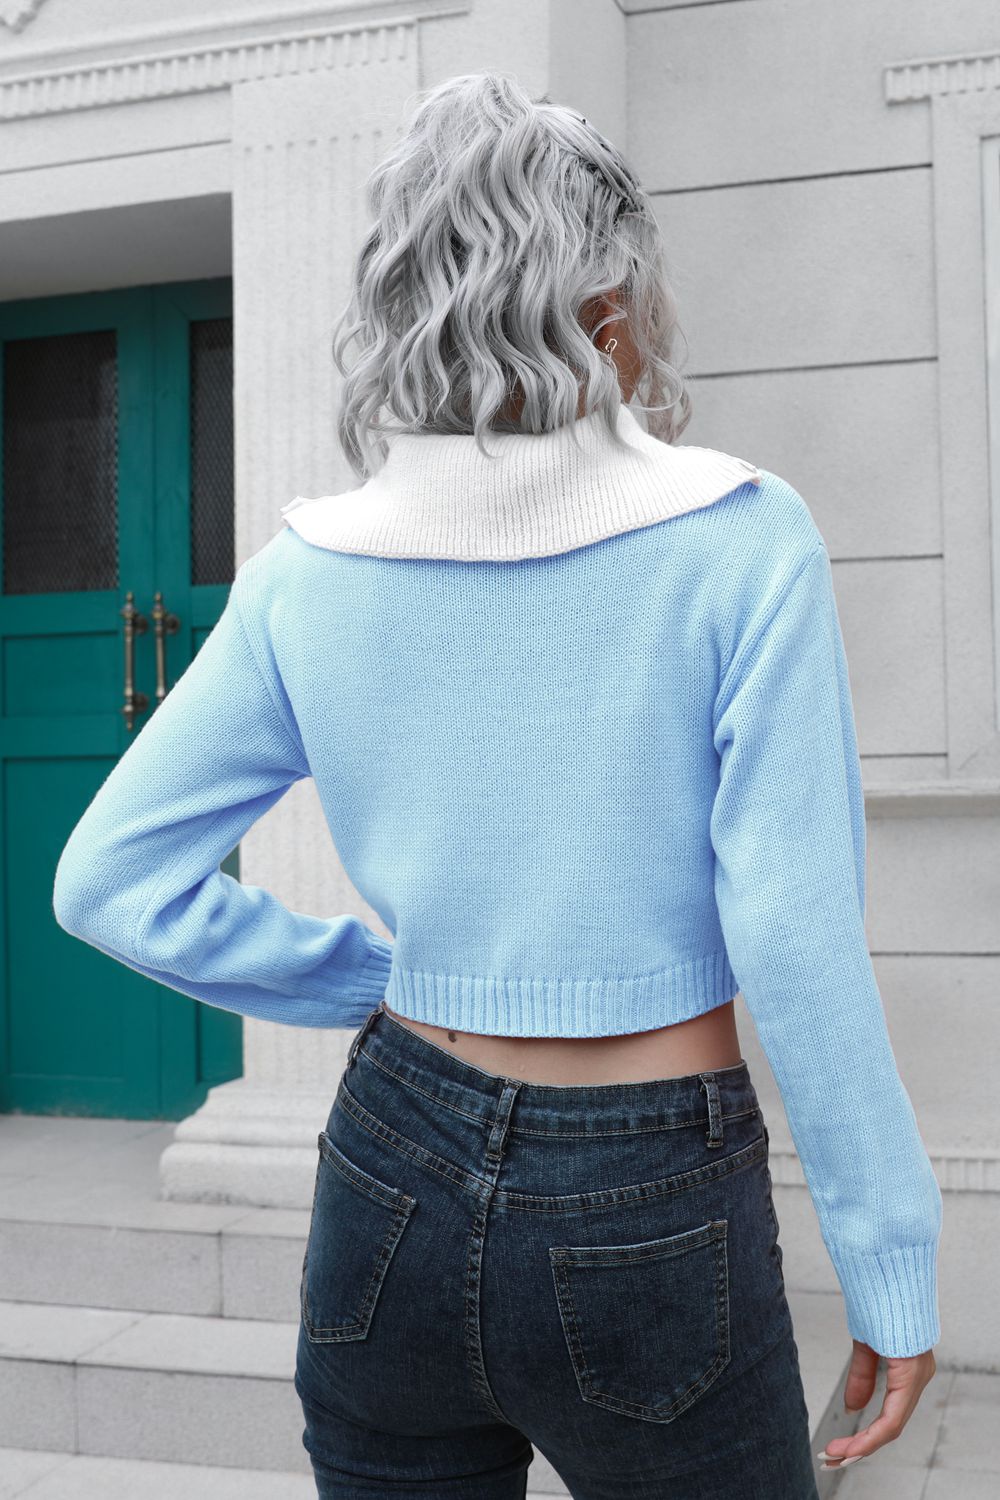 Contrast Collared Cropped Sweater - KRE Prime Deals